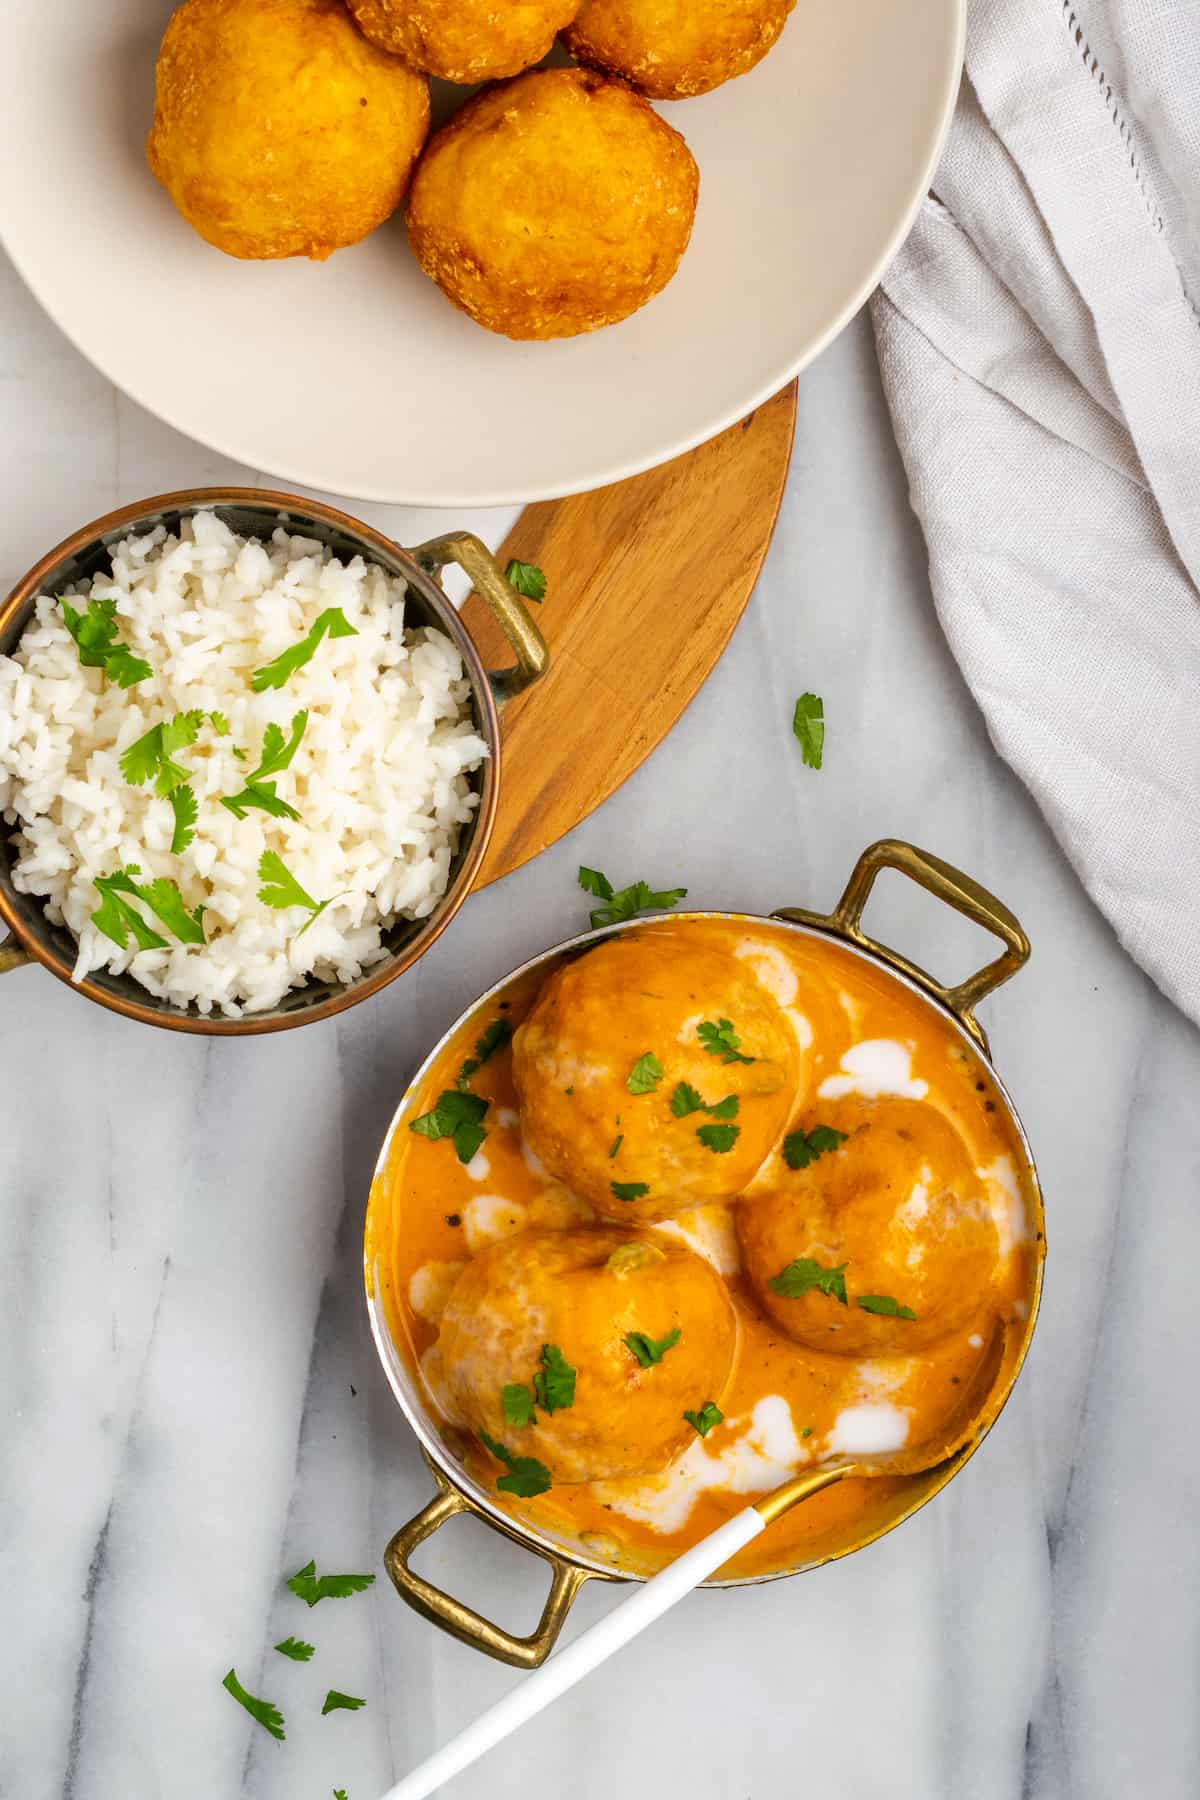 Overhead view of malai kofta in bowl with sauce, with bowl of rice and dumplings